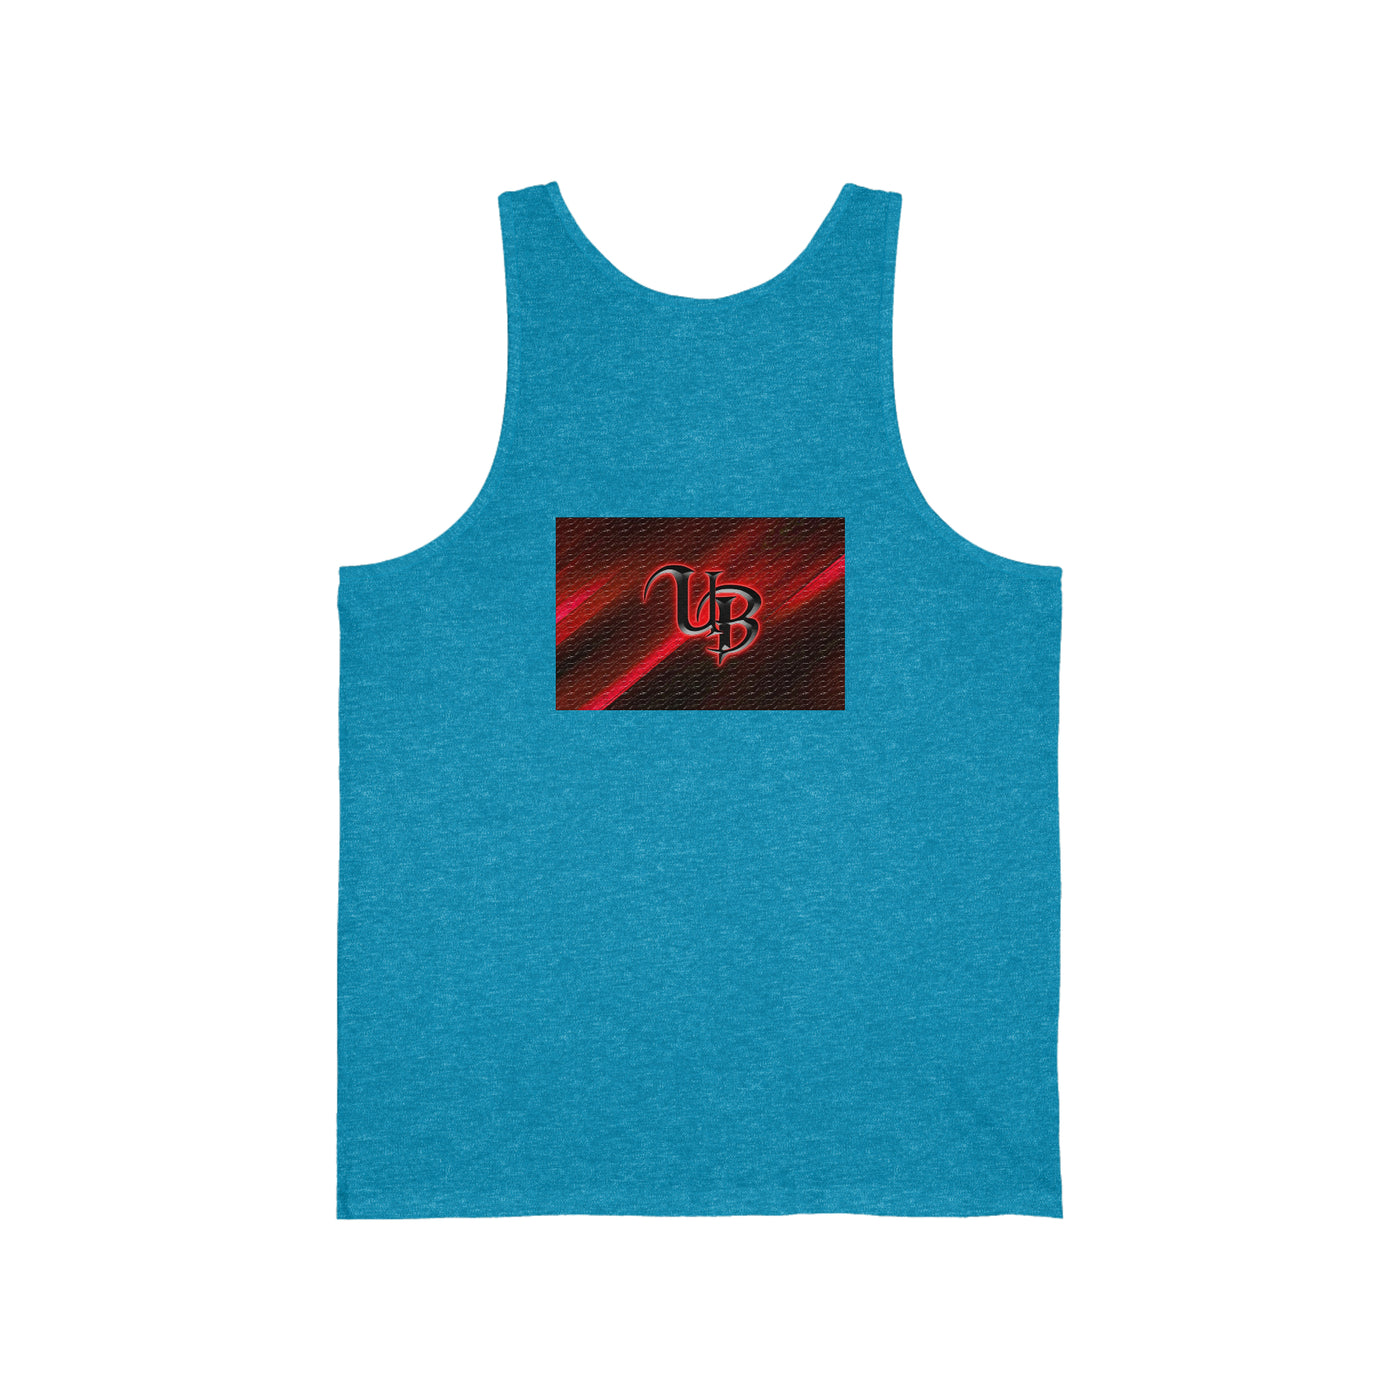 Unisex Jersey Tank - Sleeveless and versatile tank top suitable for both men and women, perfect for casual wear or workouts